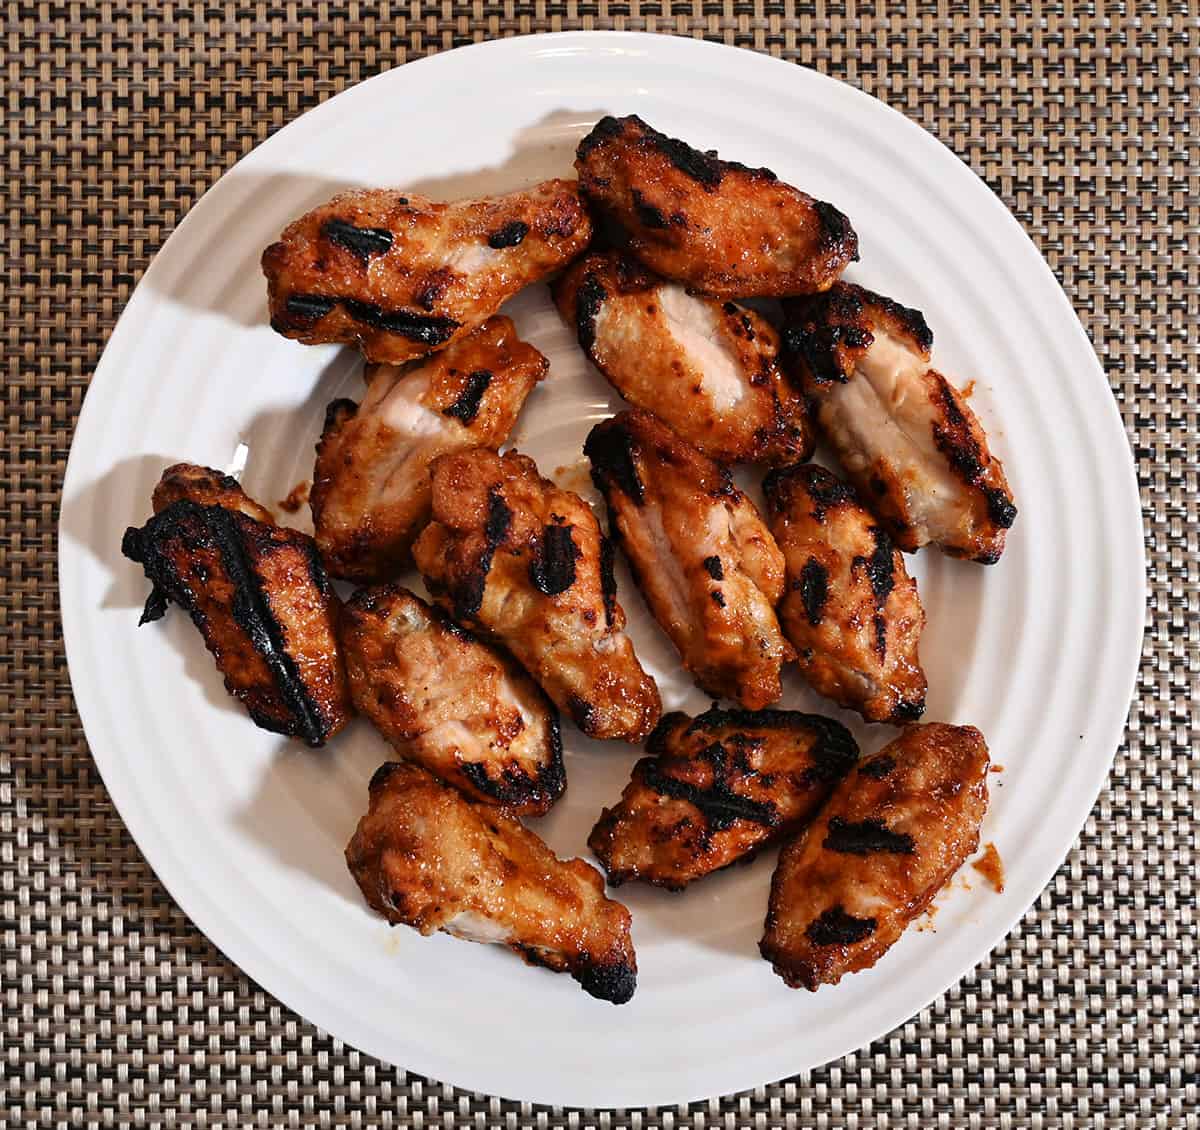 Image of a plate of barbecued wings.